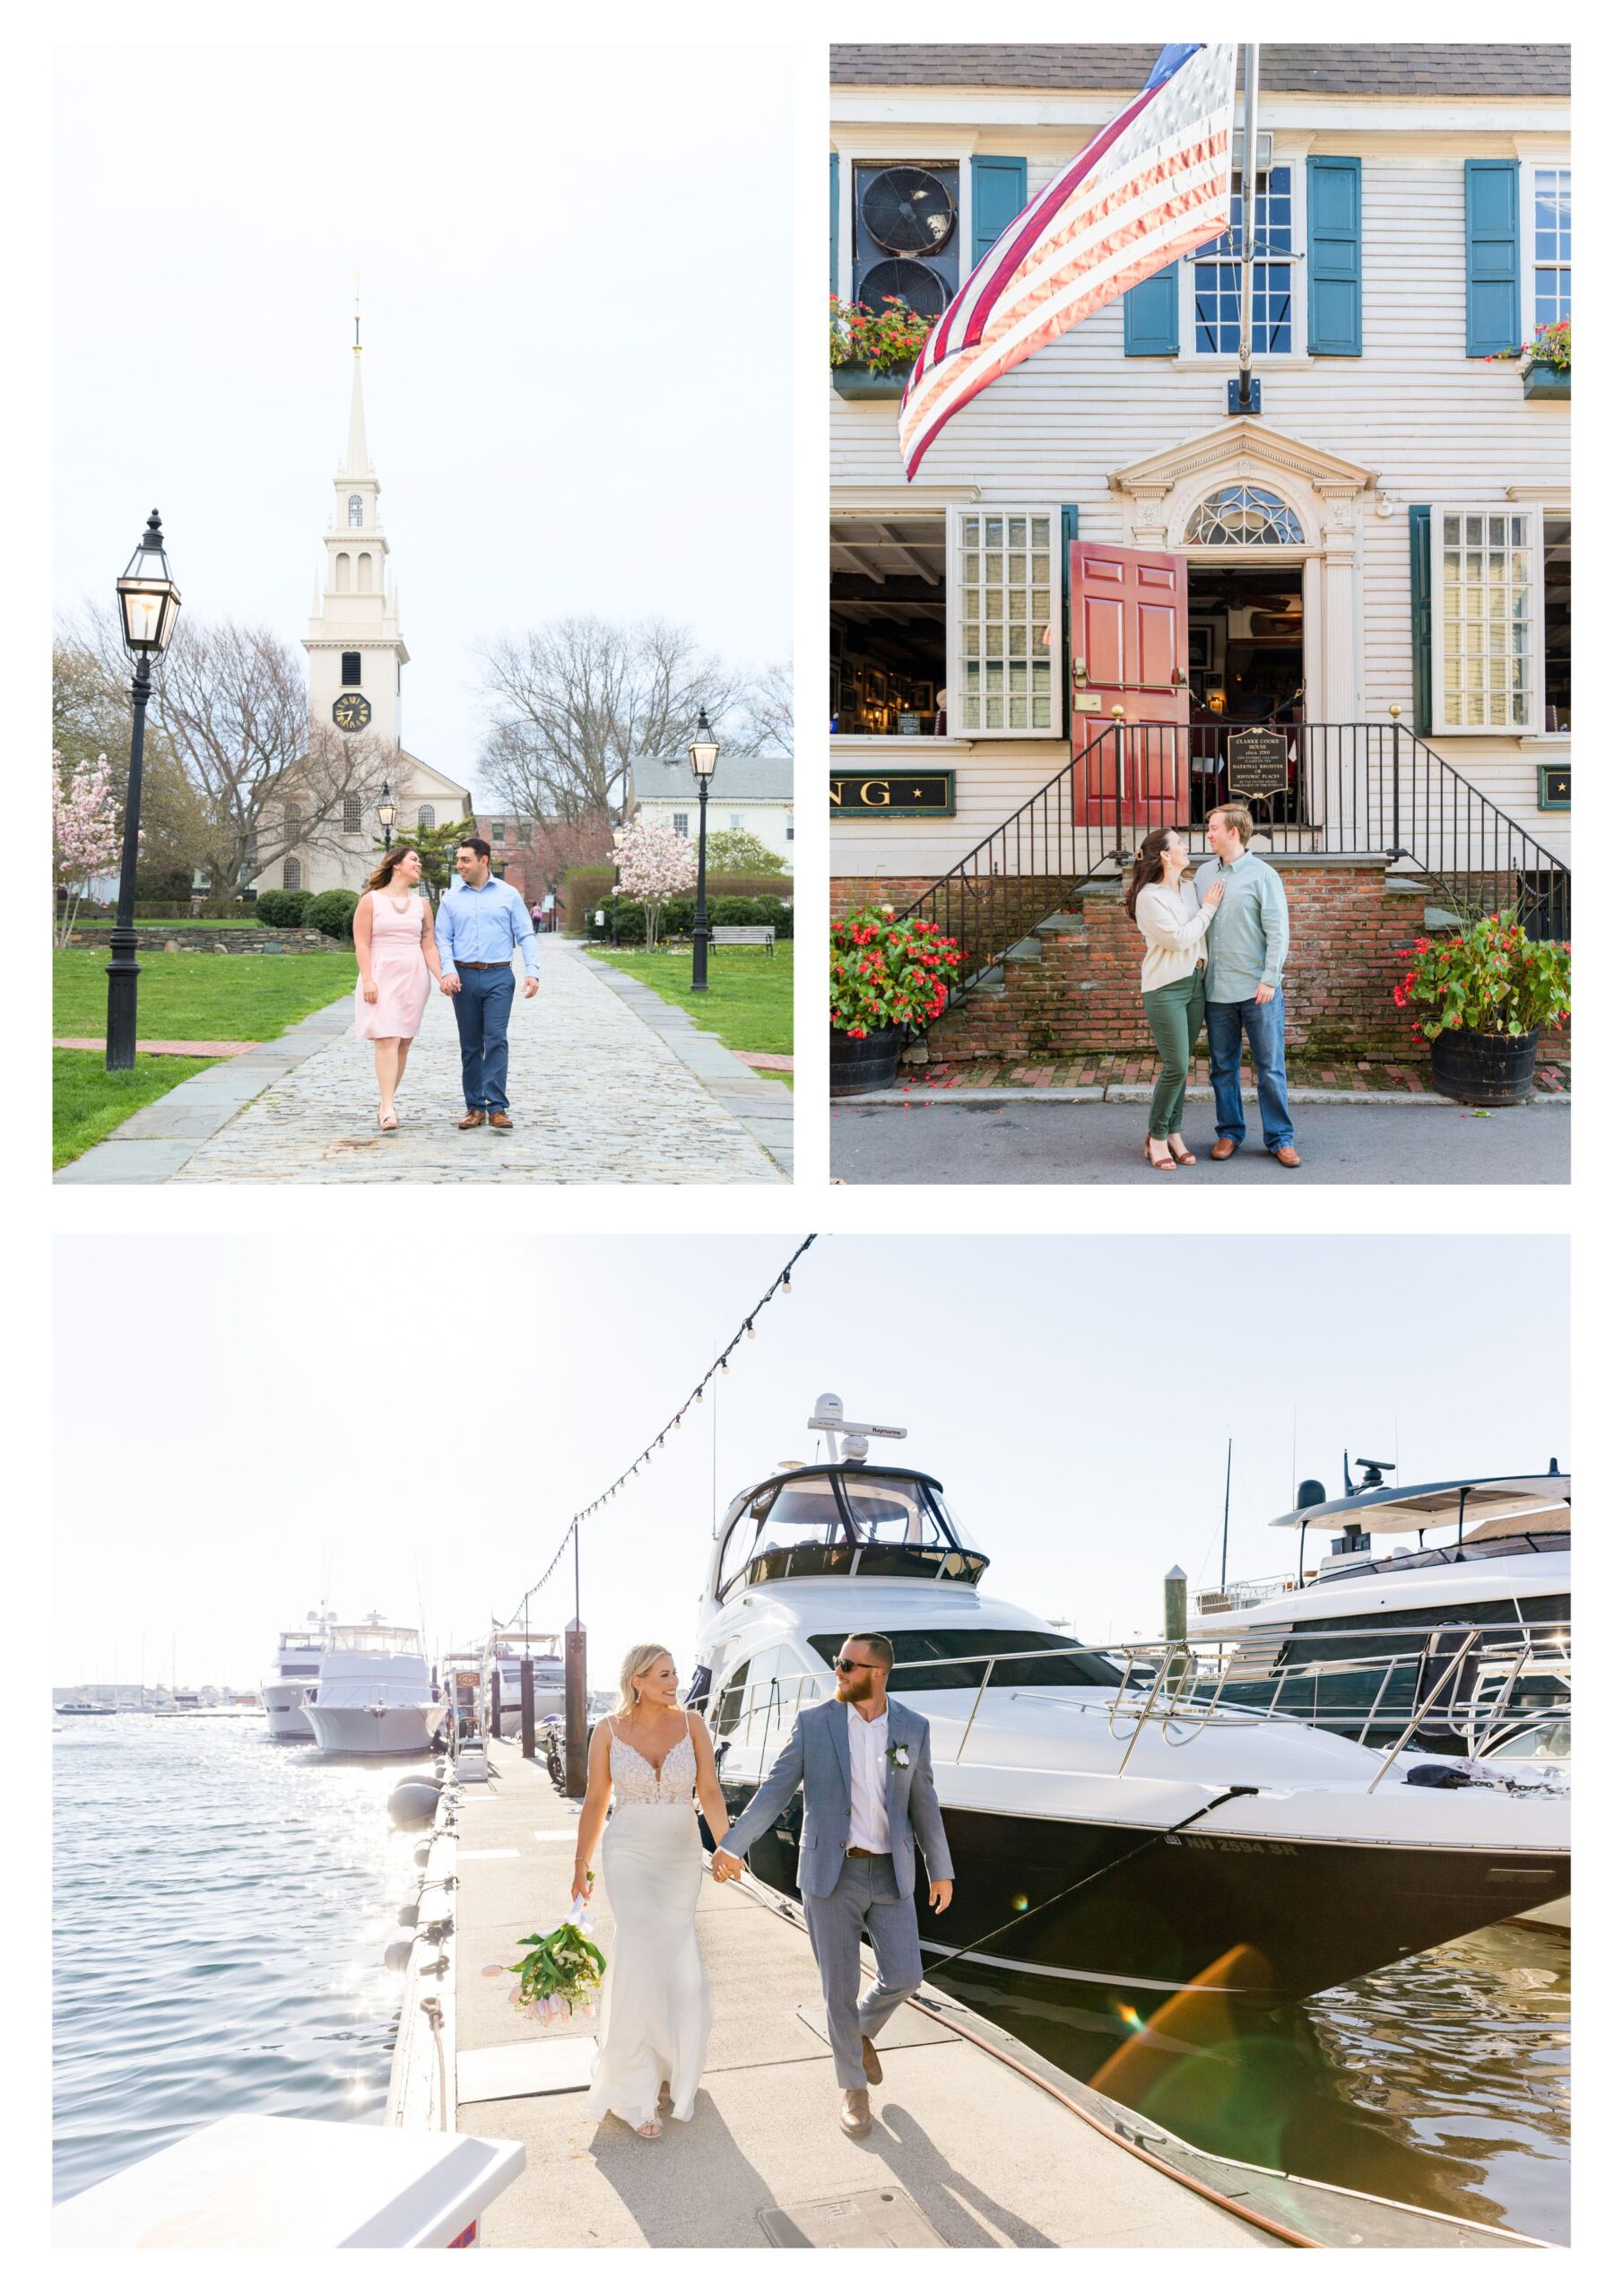 Couples pose in various portrait locations surrounding Bowens Wharf in Newport Rhode Island. 